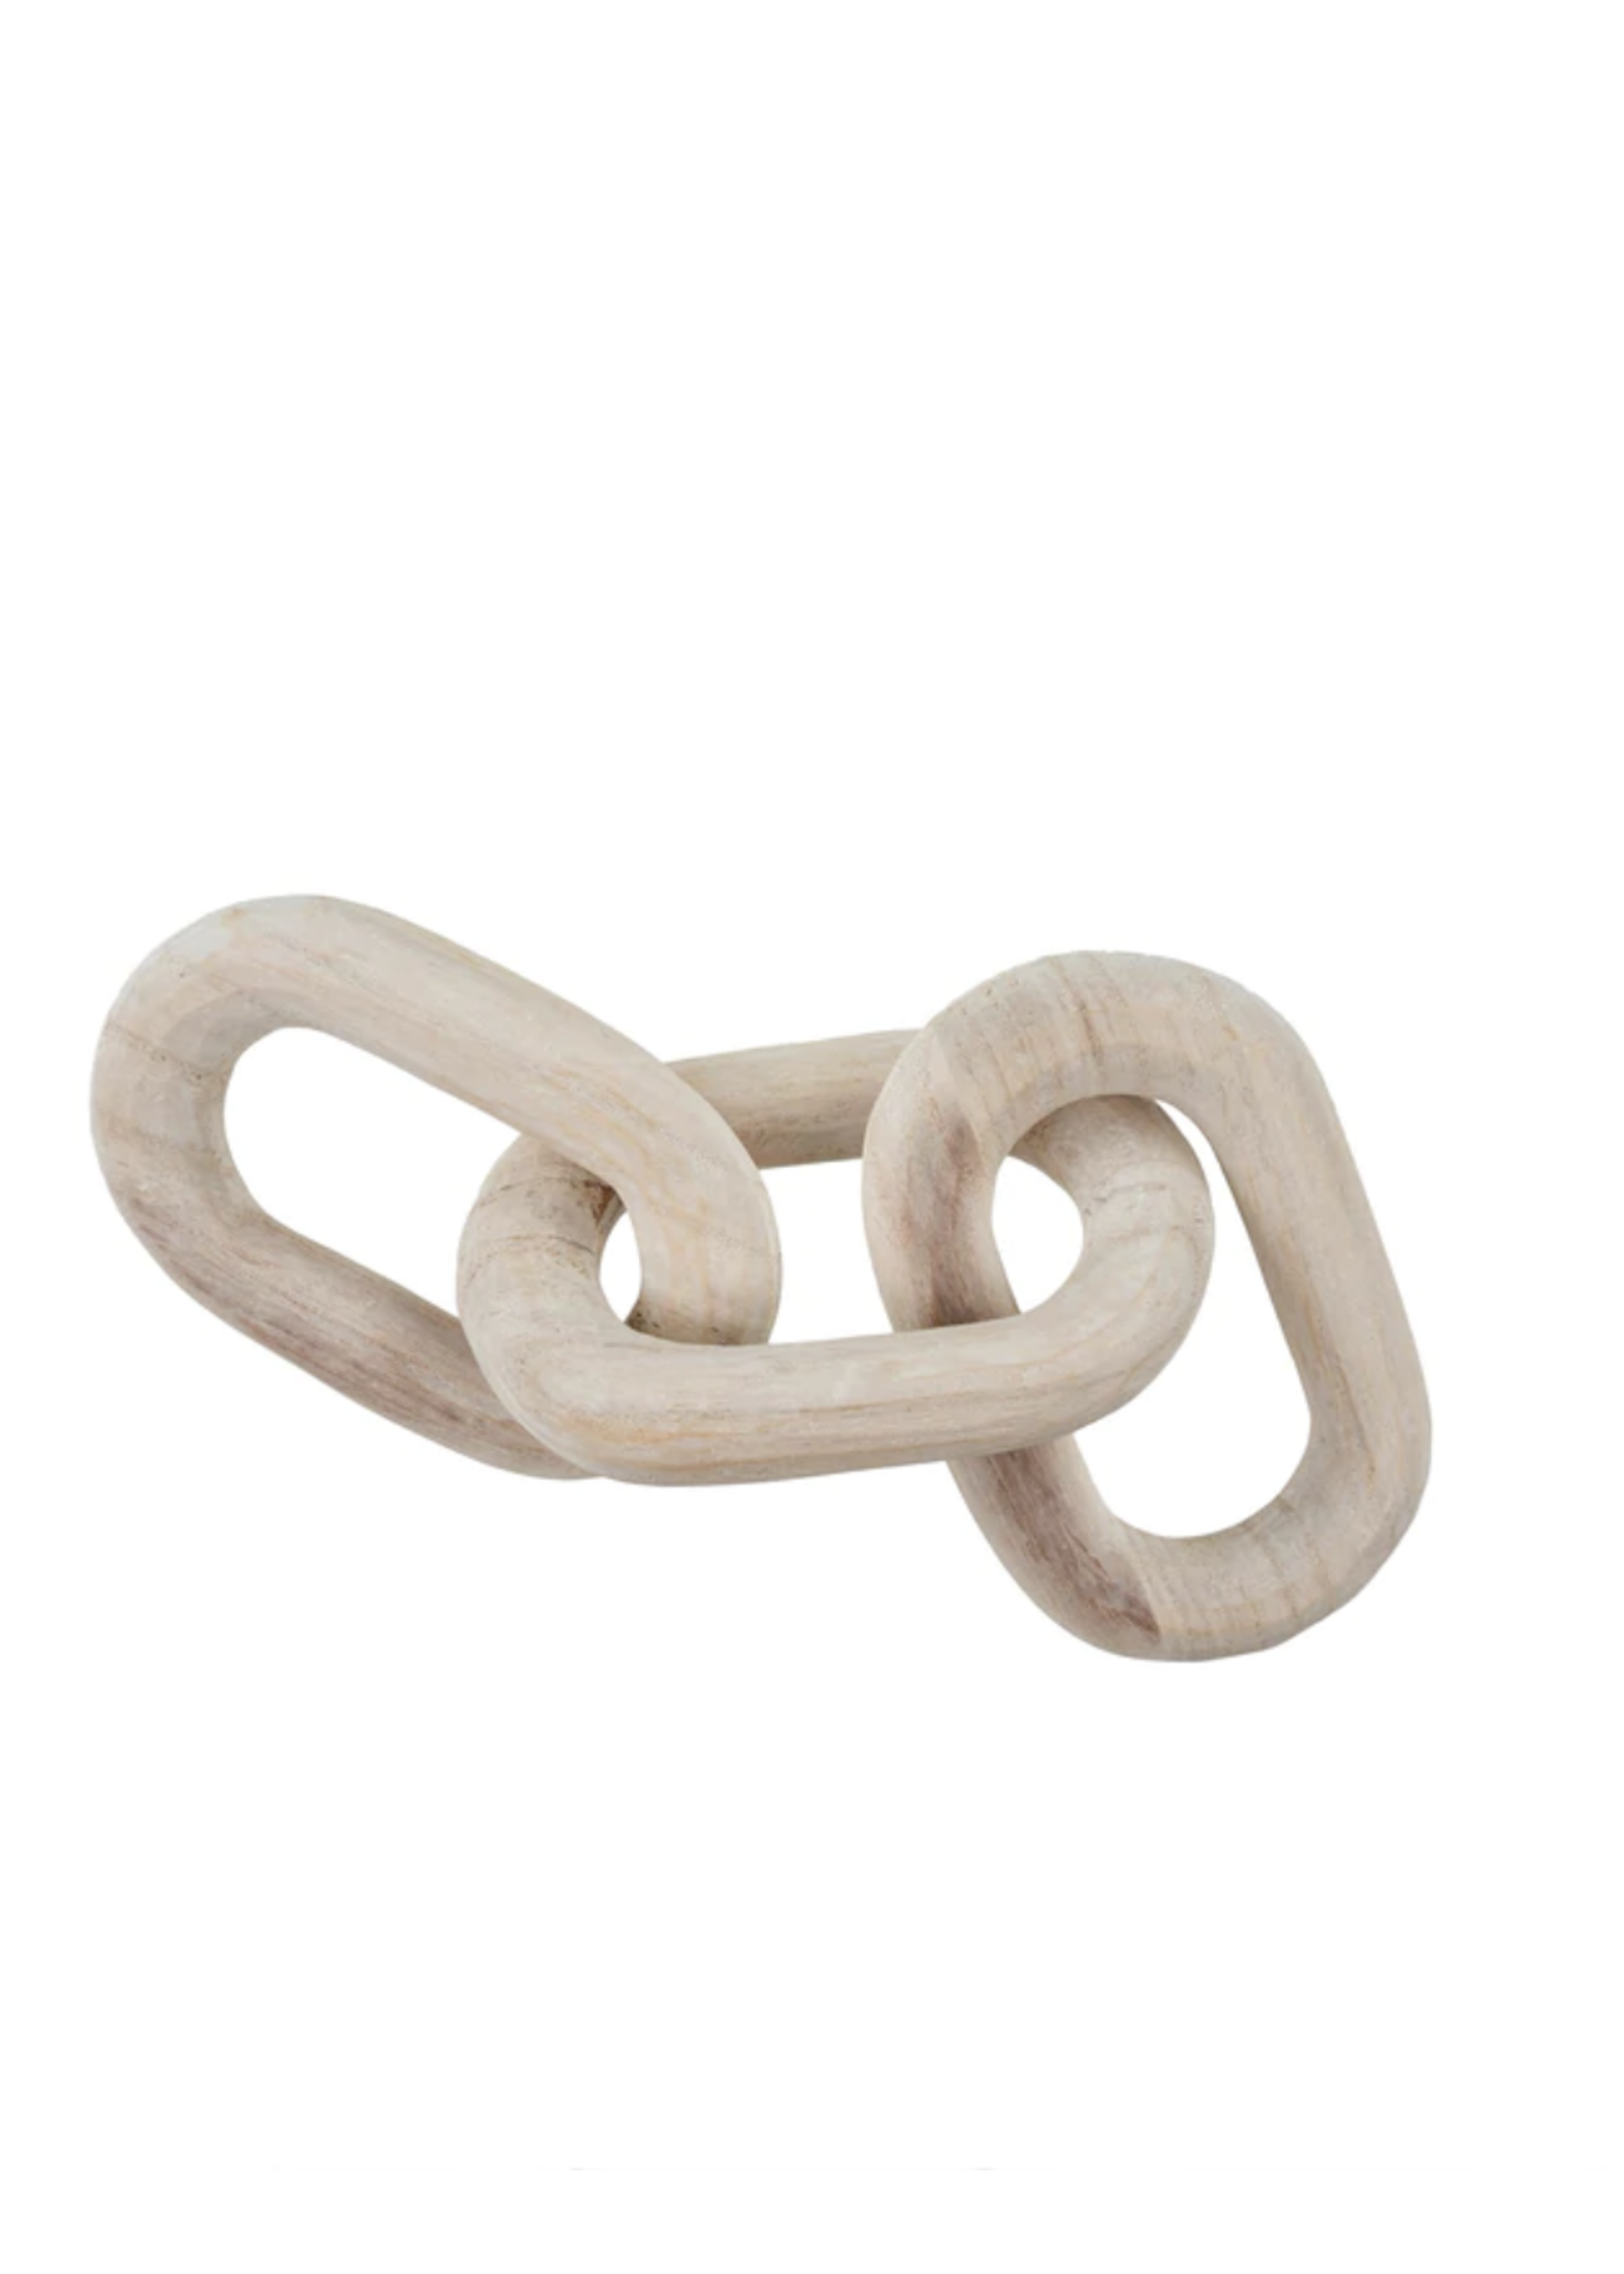 Indaba Trading Co 60% OFF Wooden Chainlinks | White Wash